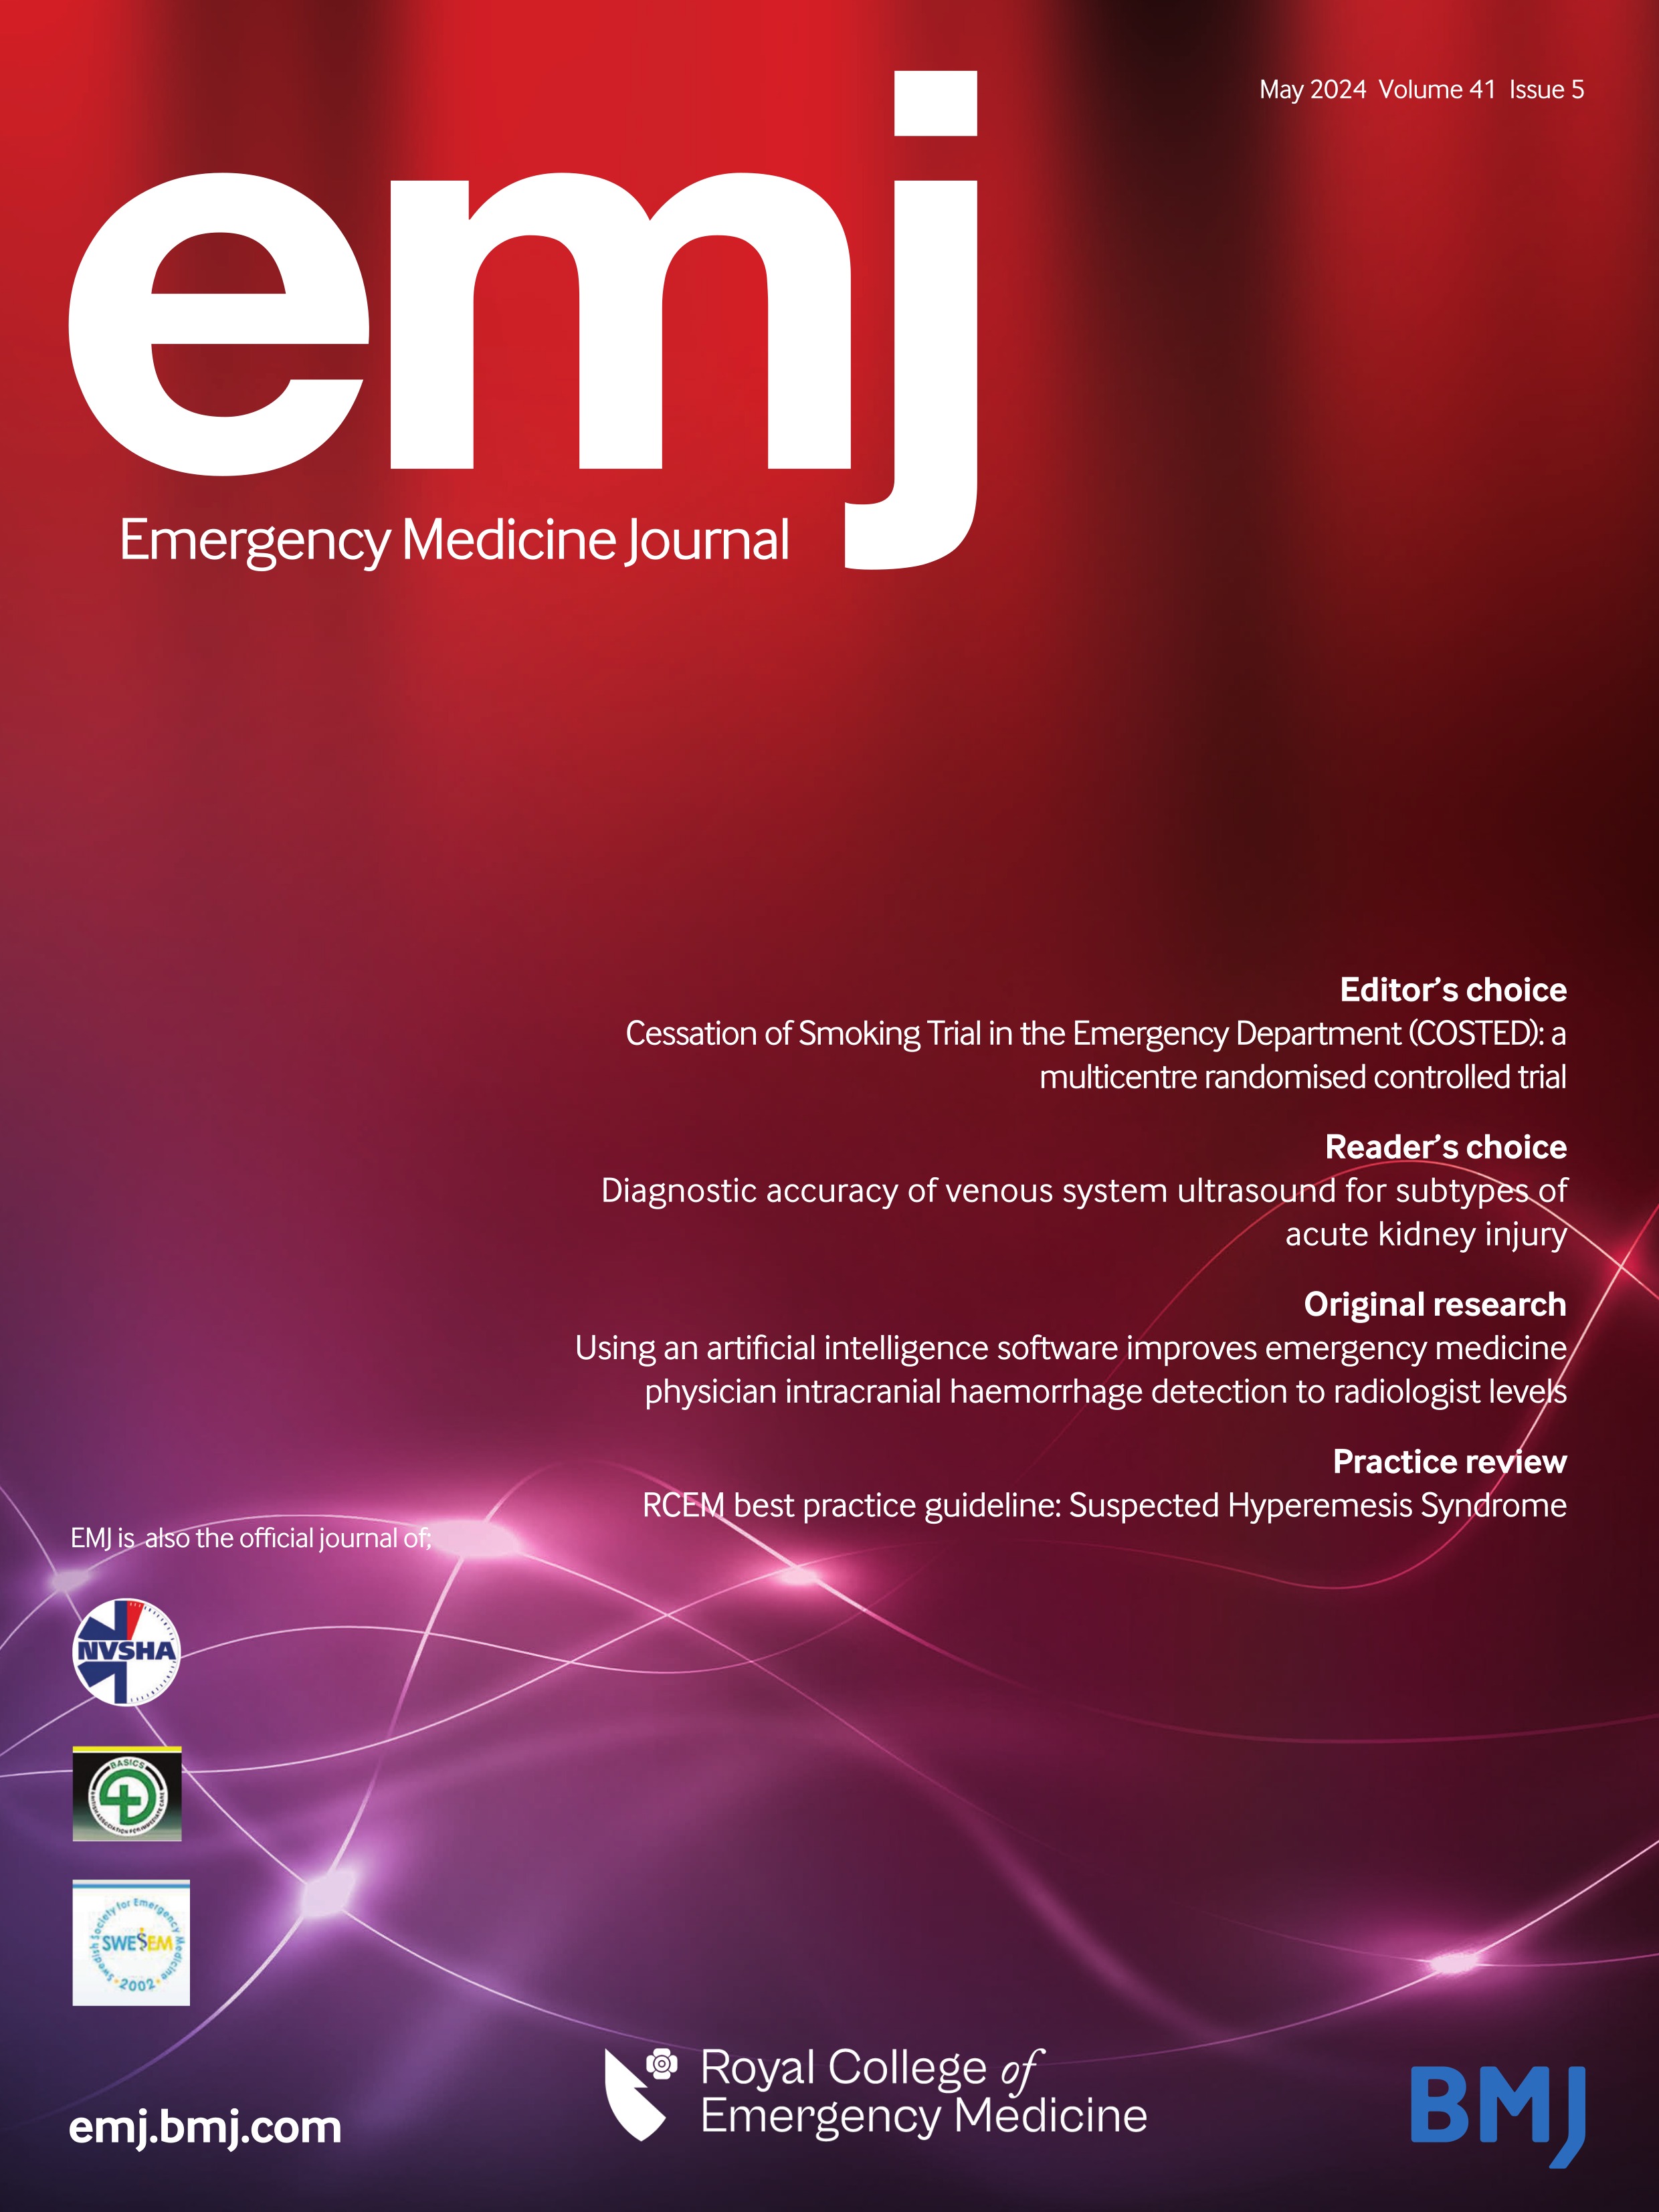 Using an artificial intelligence software improves emergency medicine physician intracranial haemorrhage detection to radiologist levels